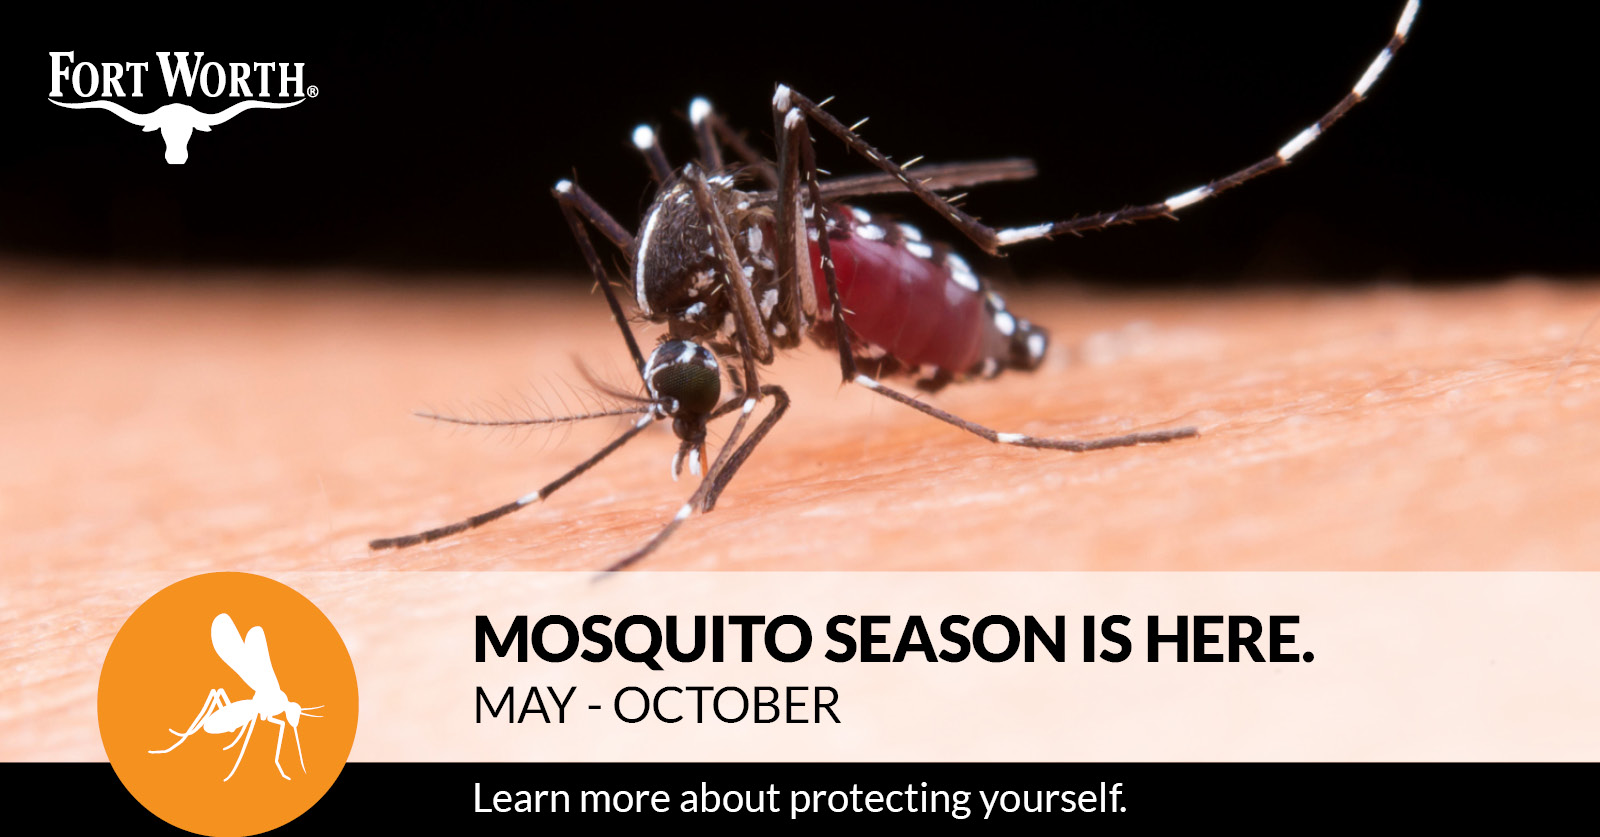 protection against west nile virus, mosquito on arm, learn about 4 Ds